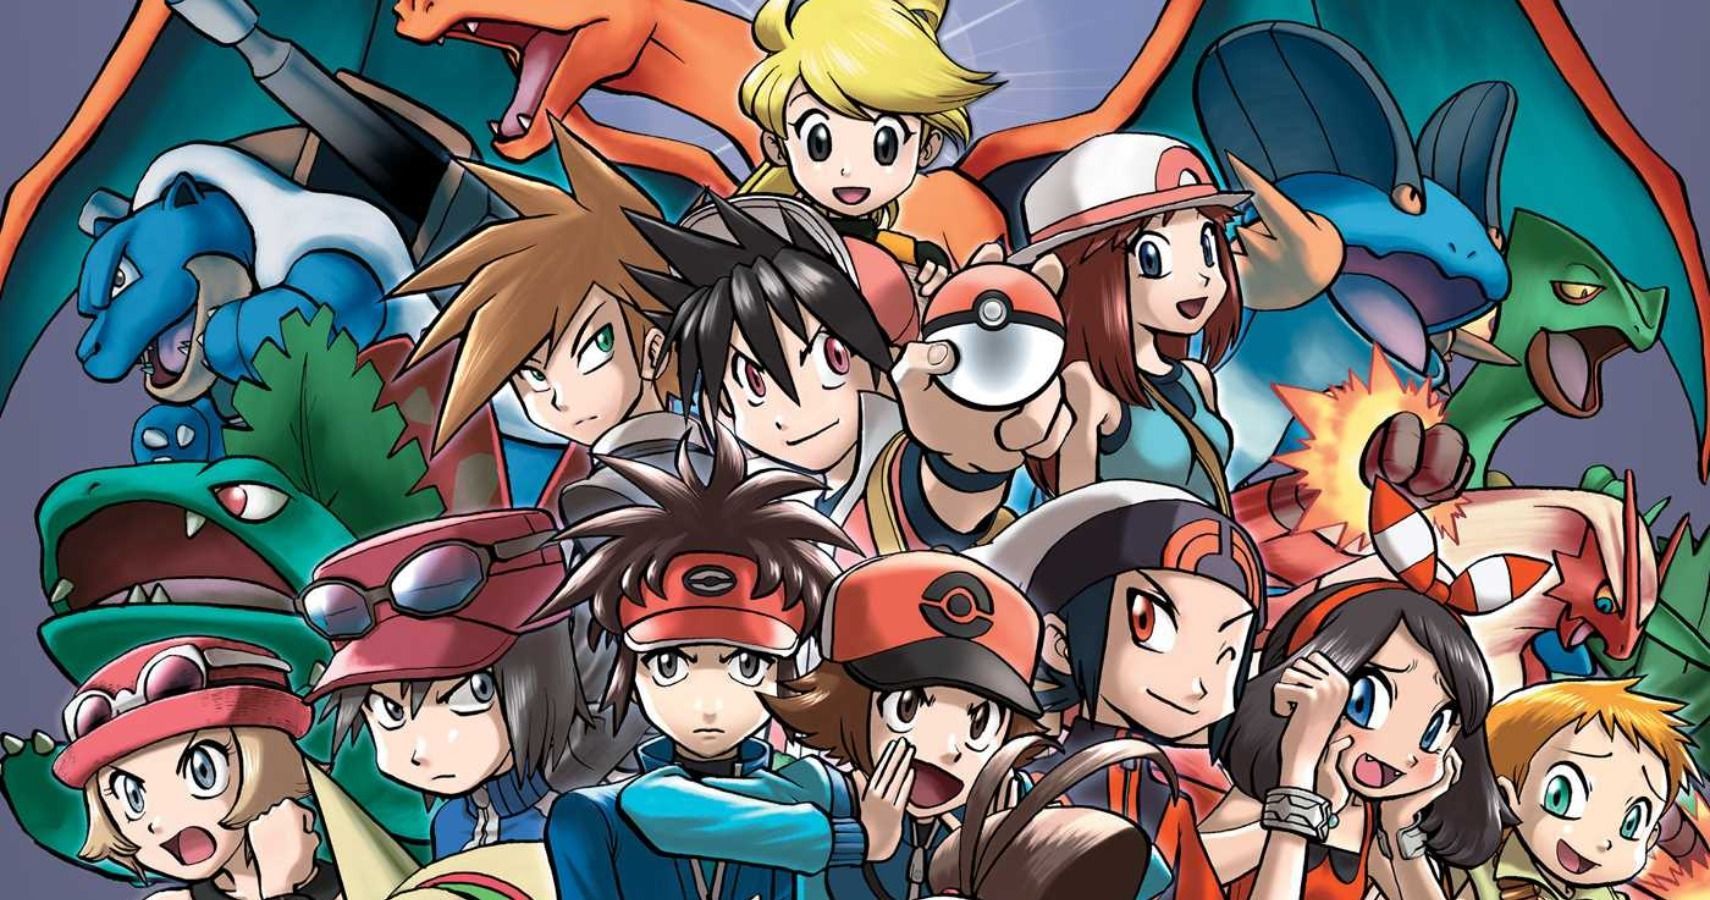 Blue-haired Pokemon trainers in the Pokemon Adventures manga series - wide 3